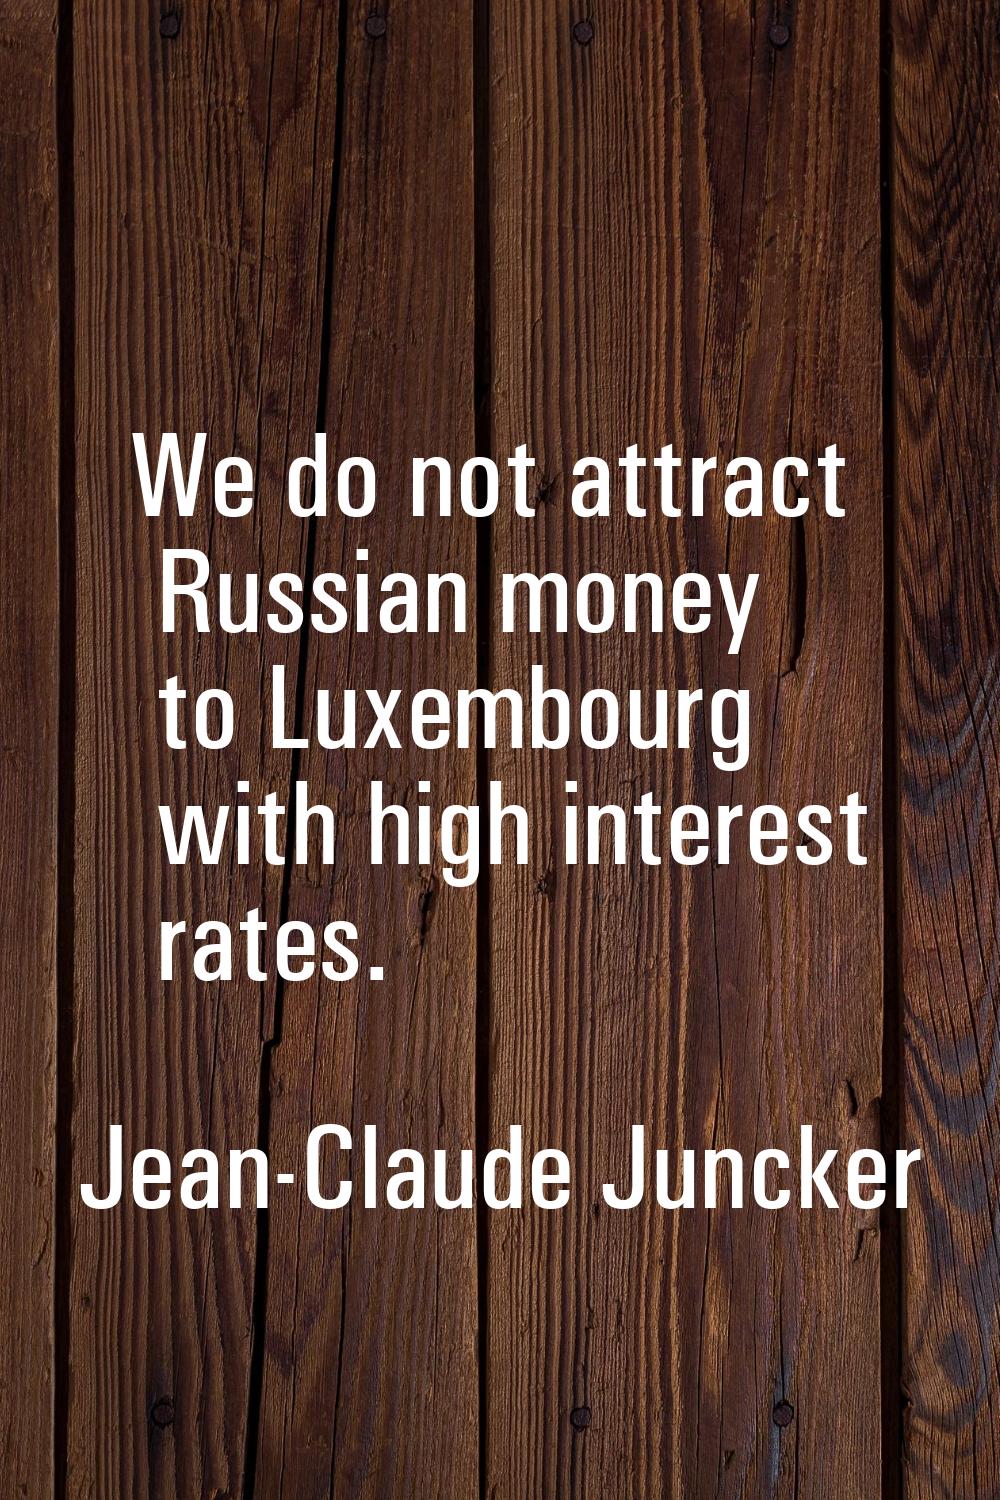 We do not attract Russian money to Luxembourg with high interest rates.